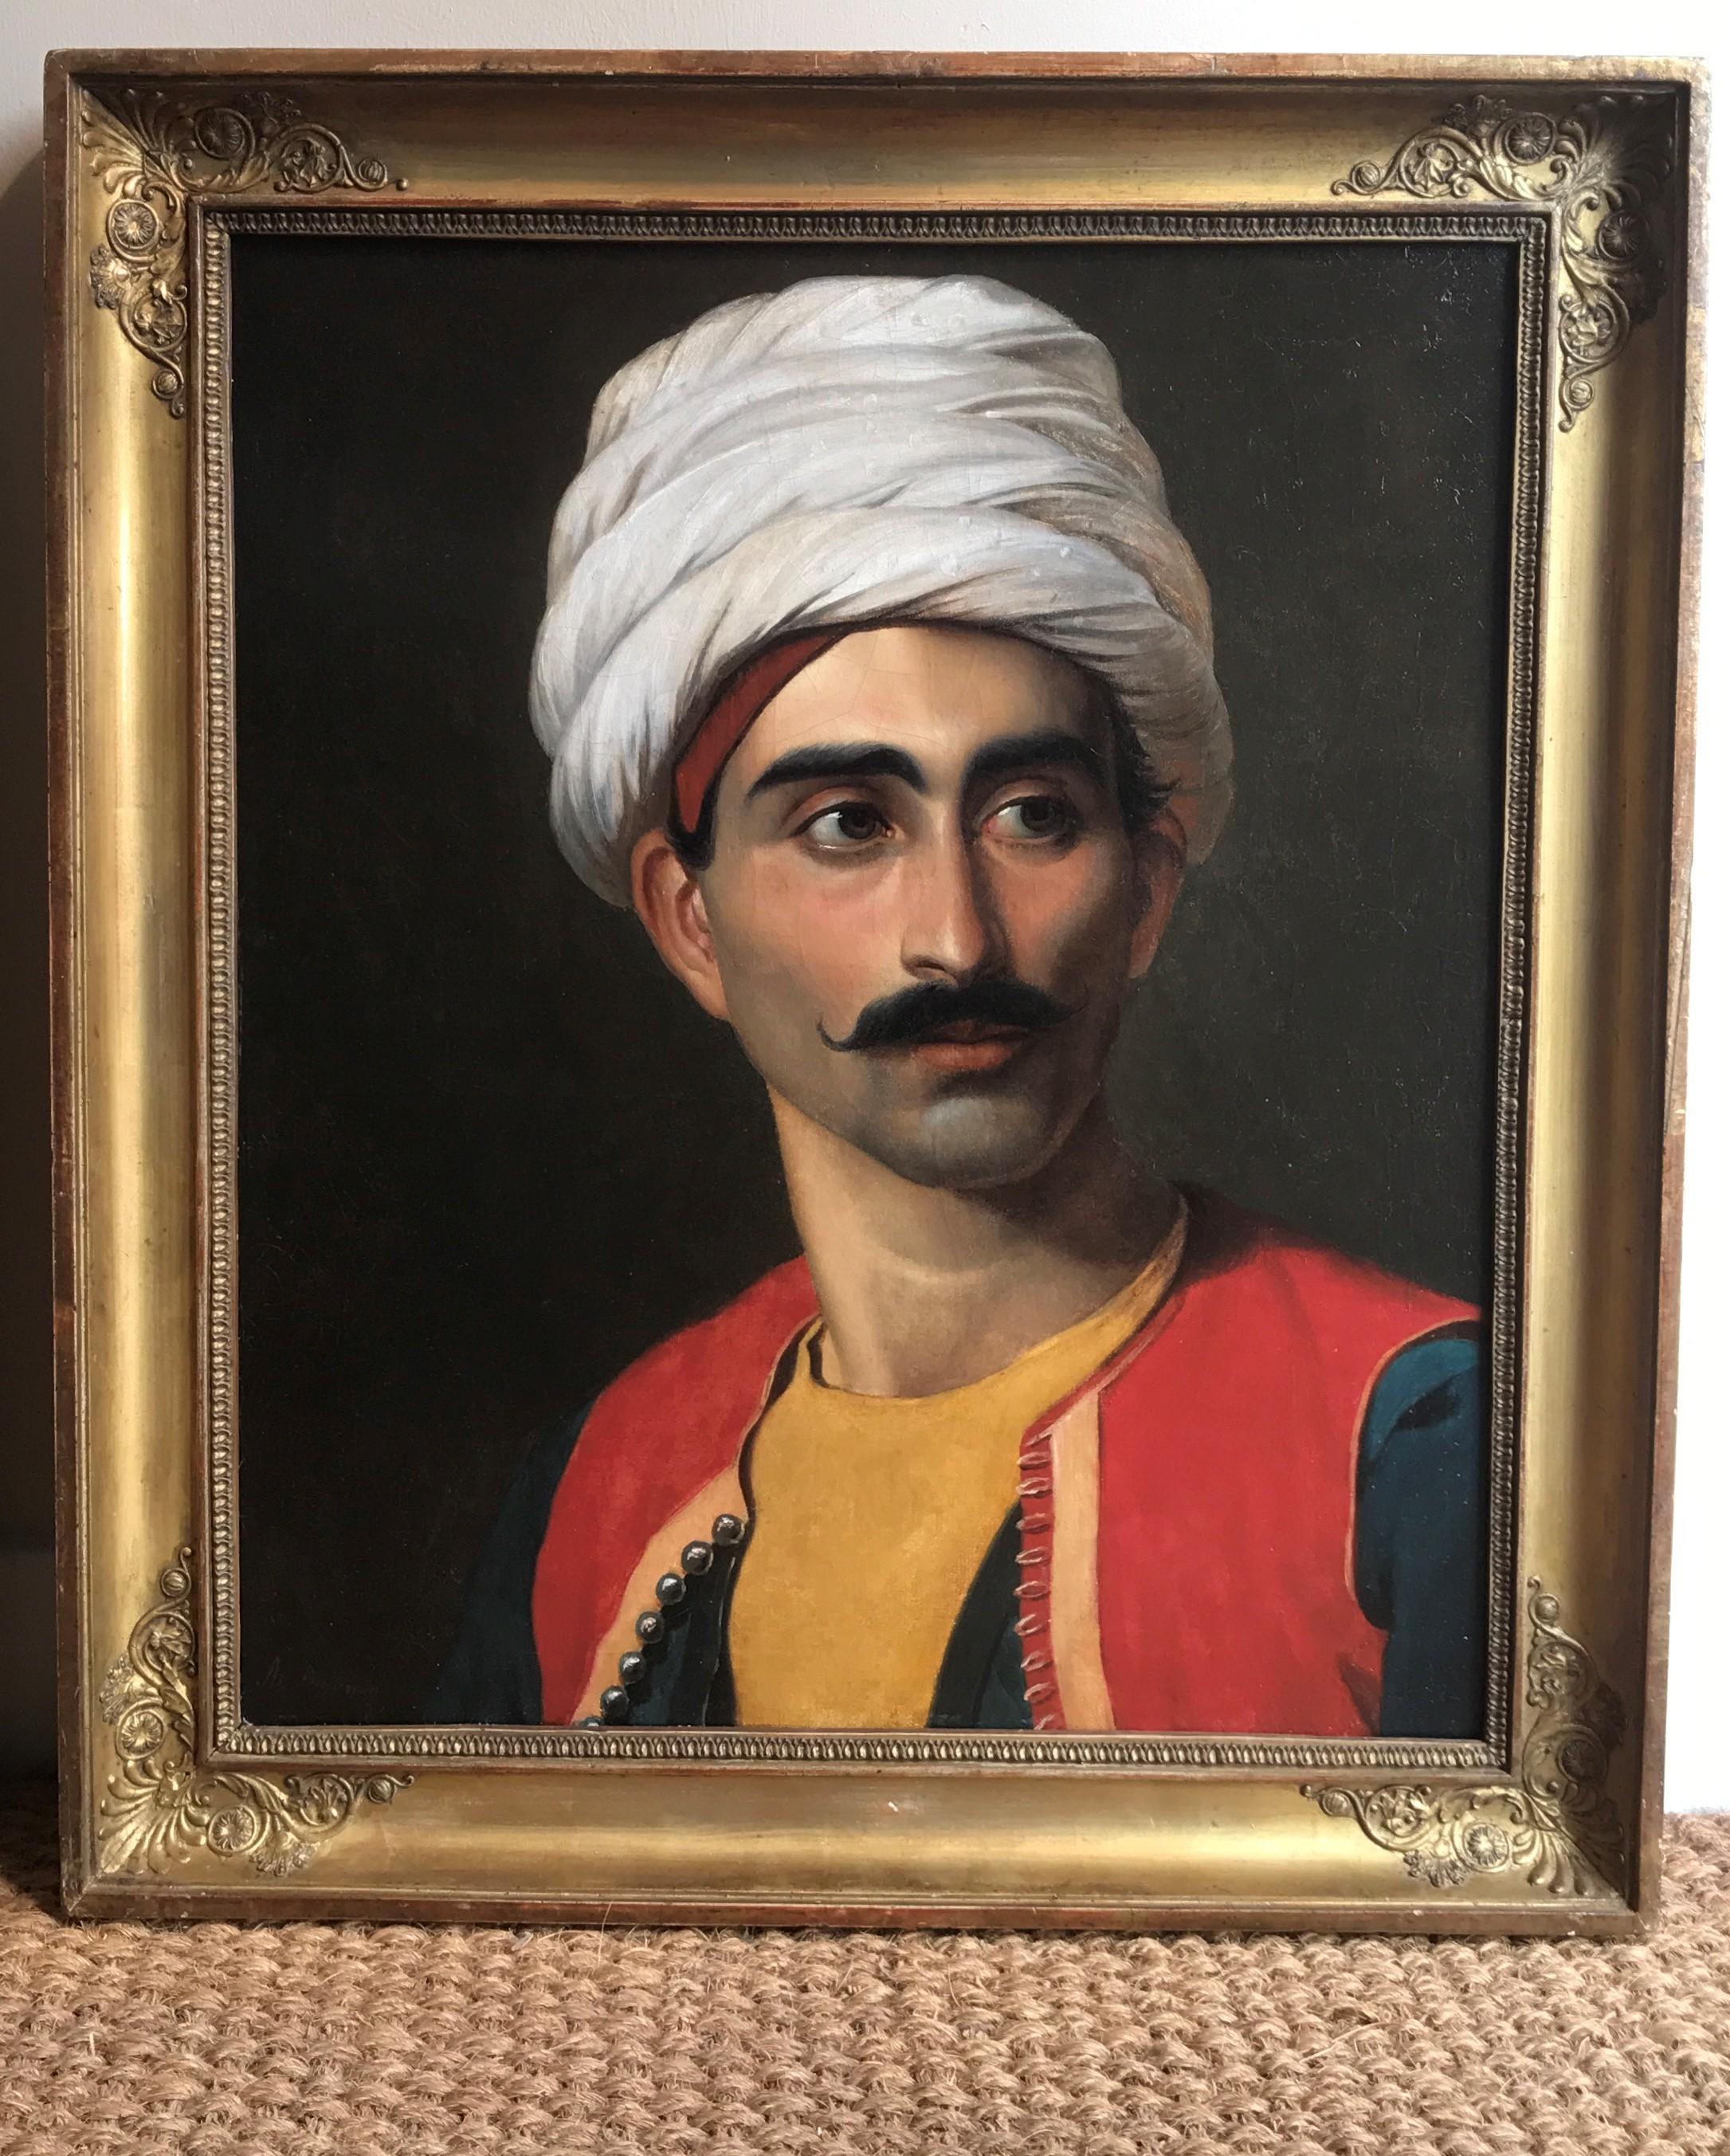 Portrait of The Bedouin Keeper of the Royal Giraffe, Hassan El Berberi c. 1827 - Brown Figurative Painting by A.S. Dujardin